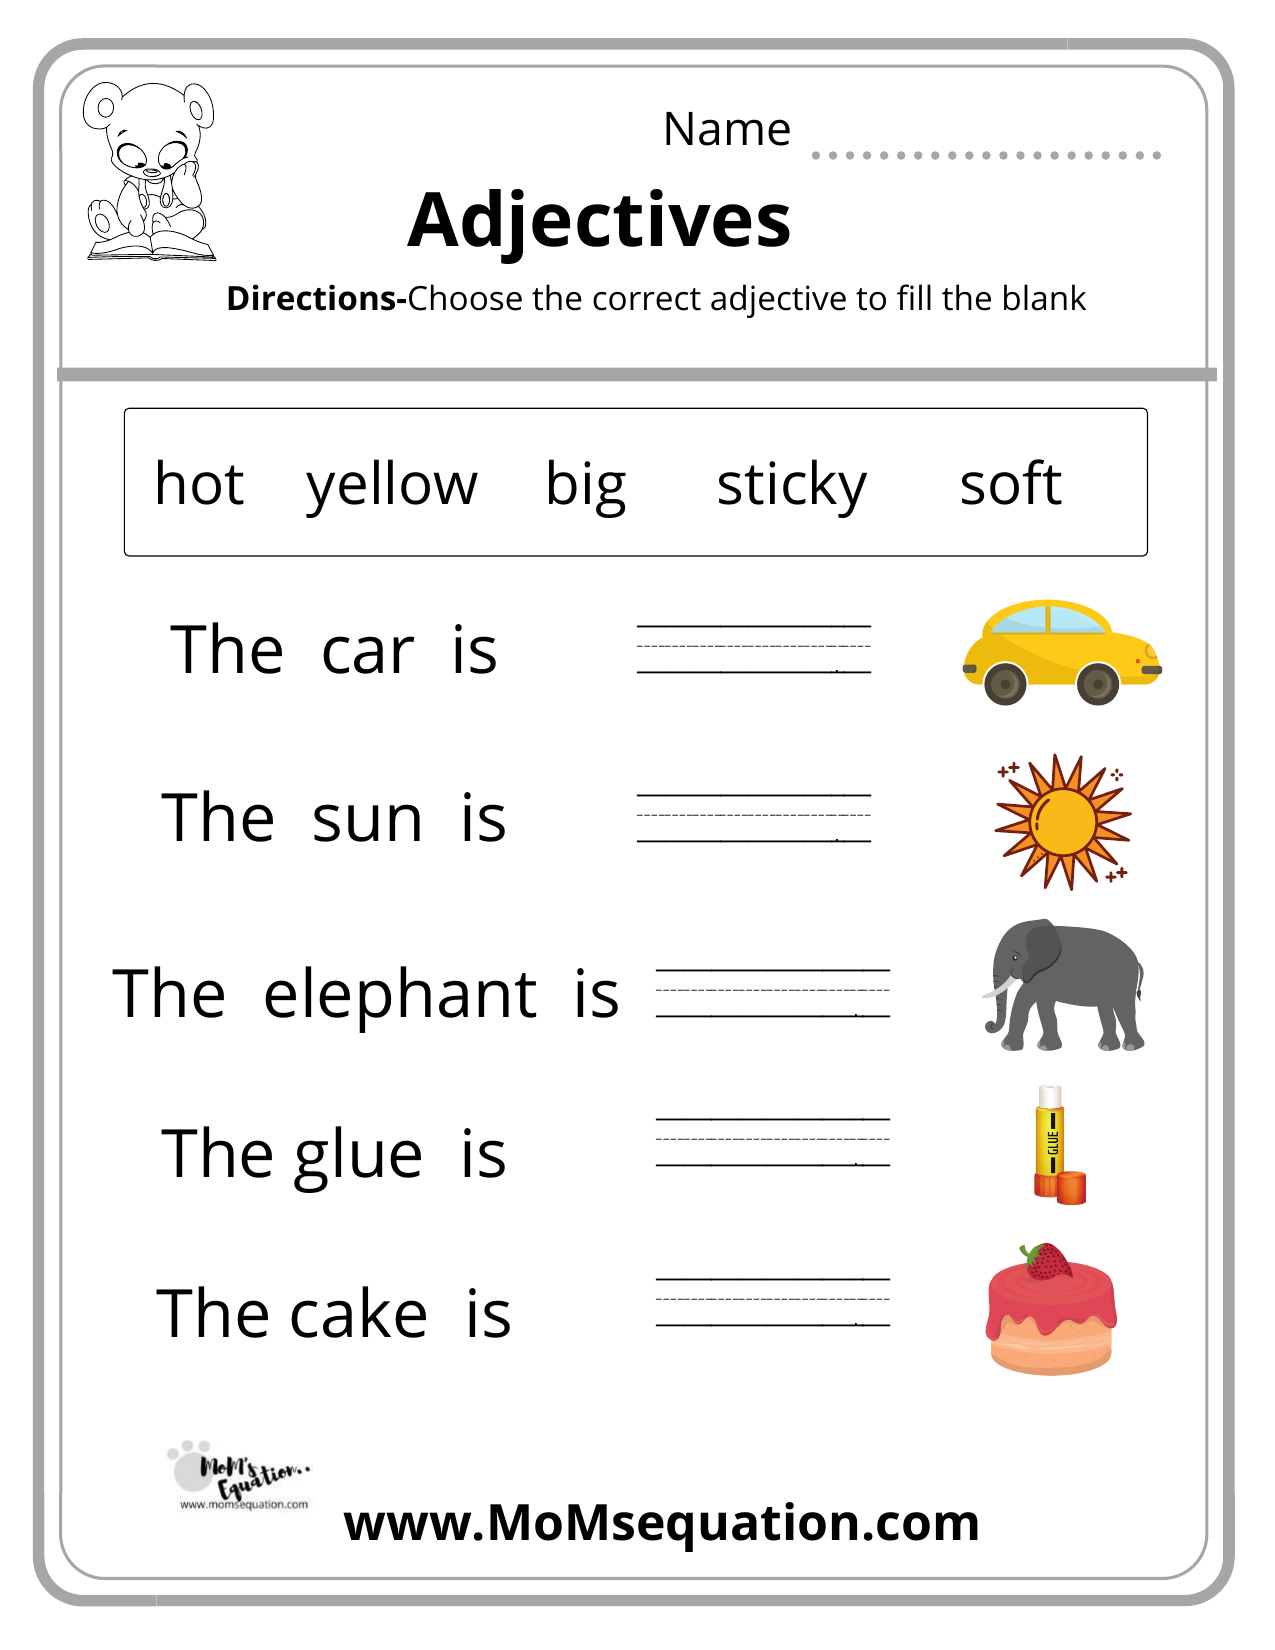 Adjectives Coloring Sheet